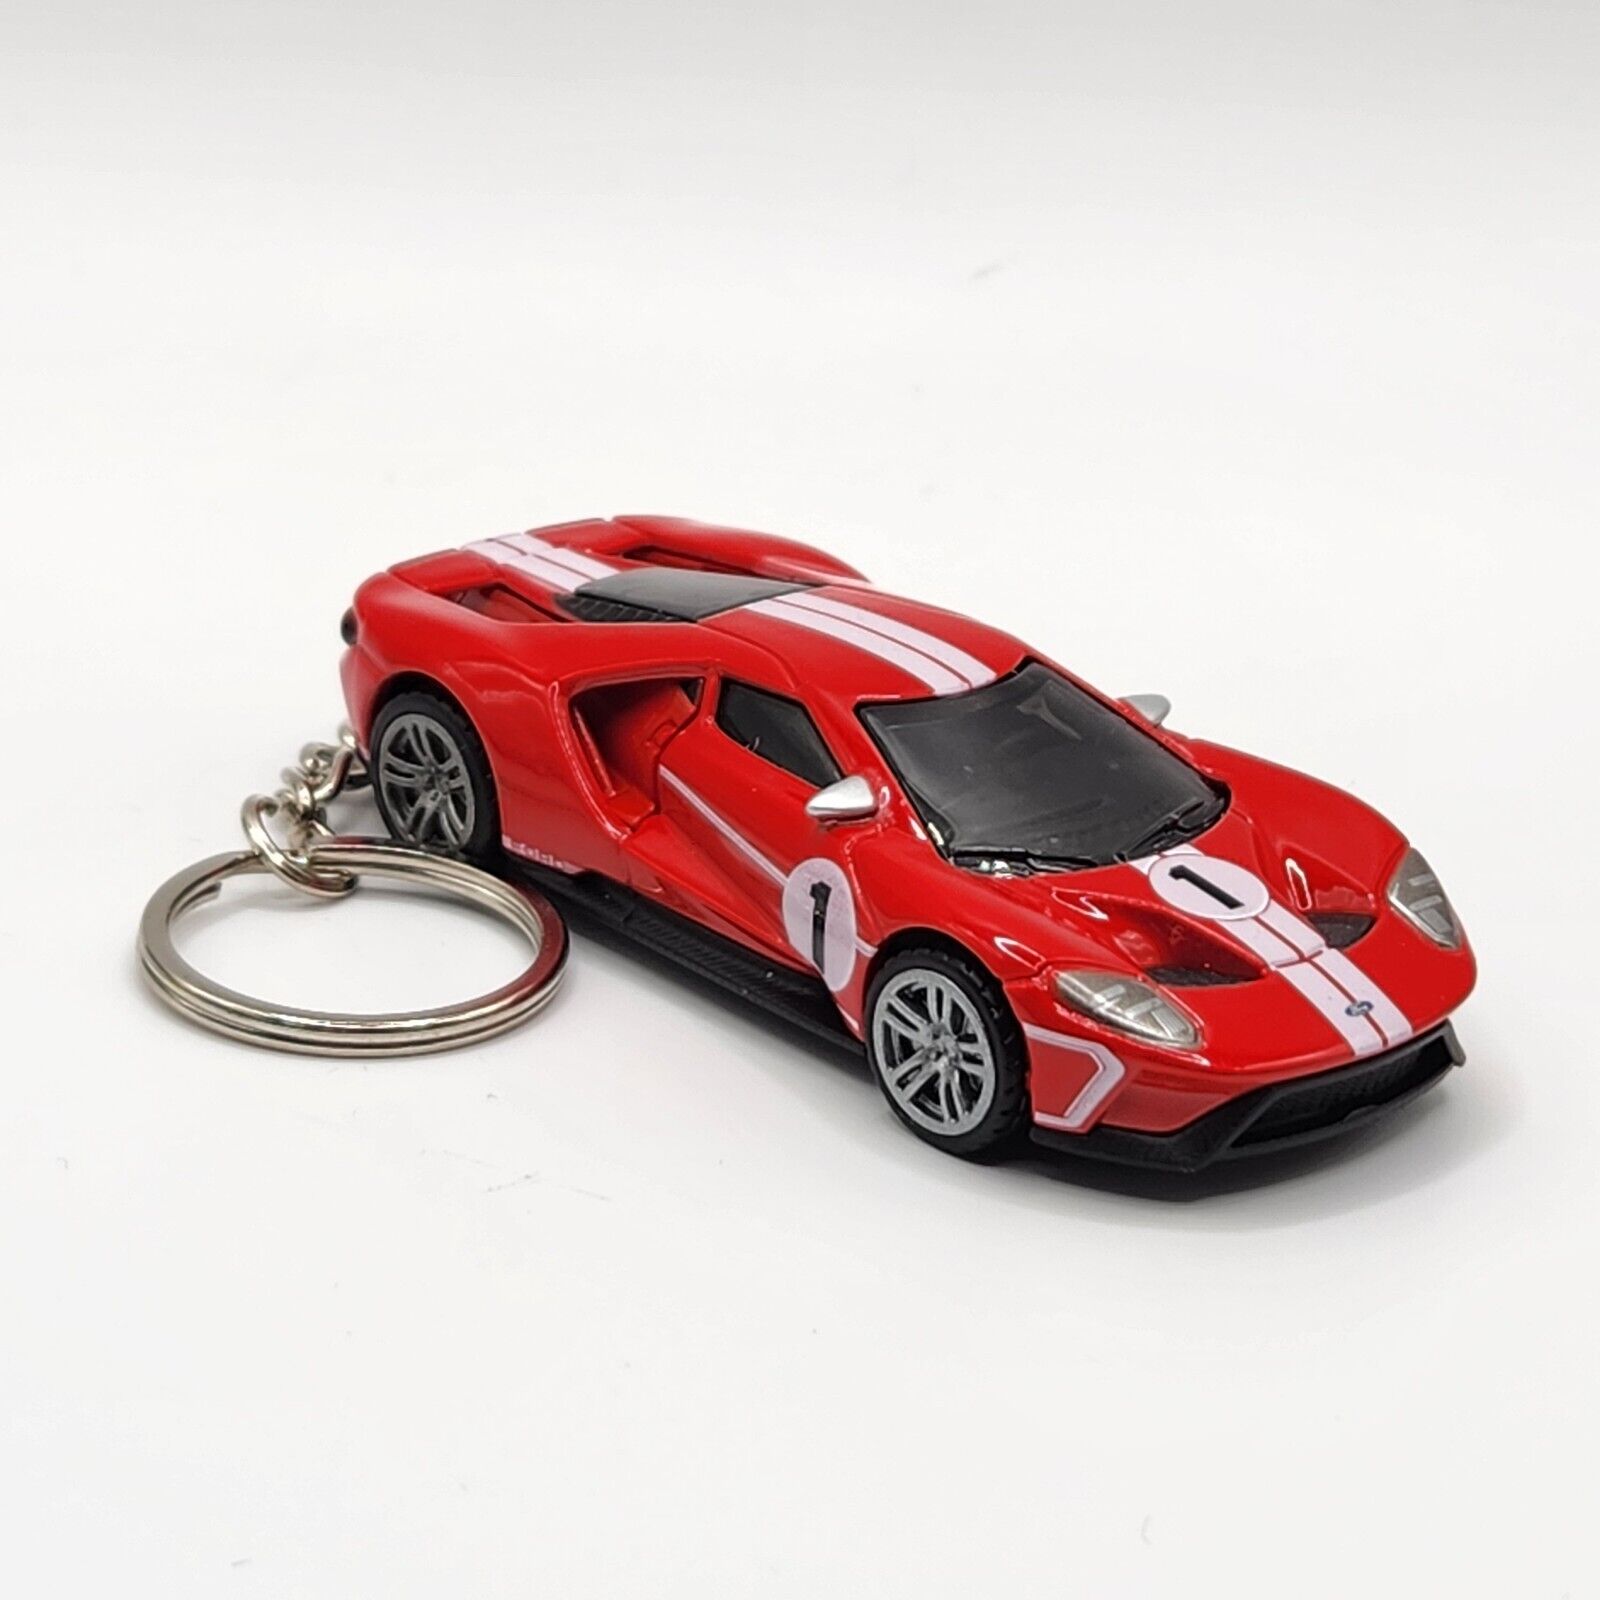 Custom Keychain Fits 2017 Ford GT Limited Edition Great Gift 🎁 